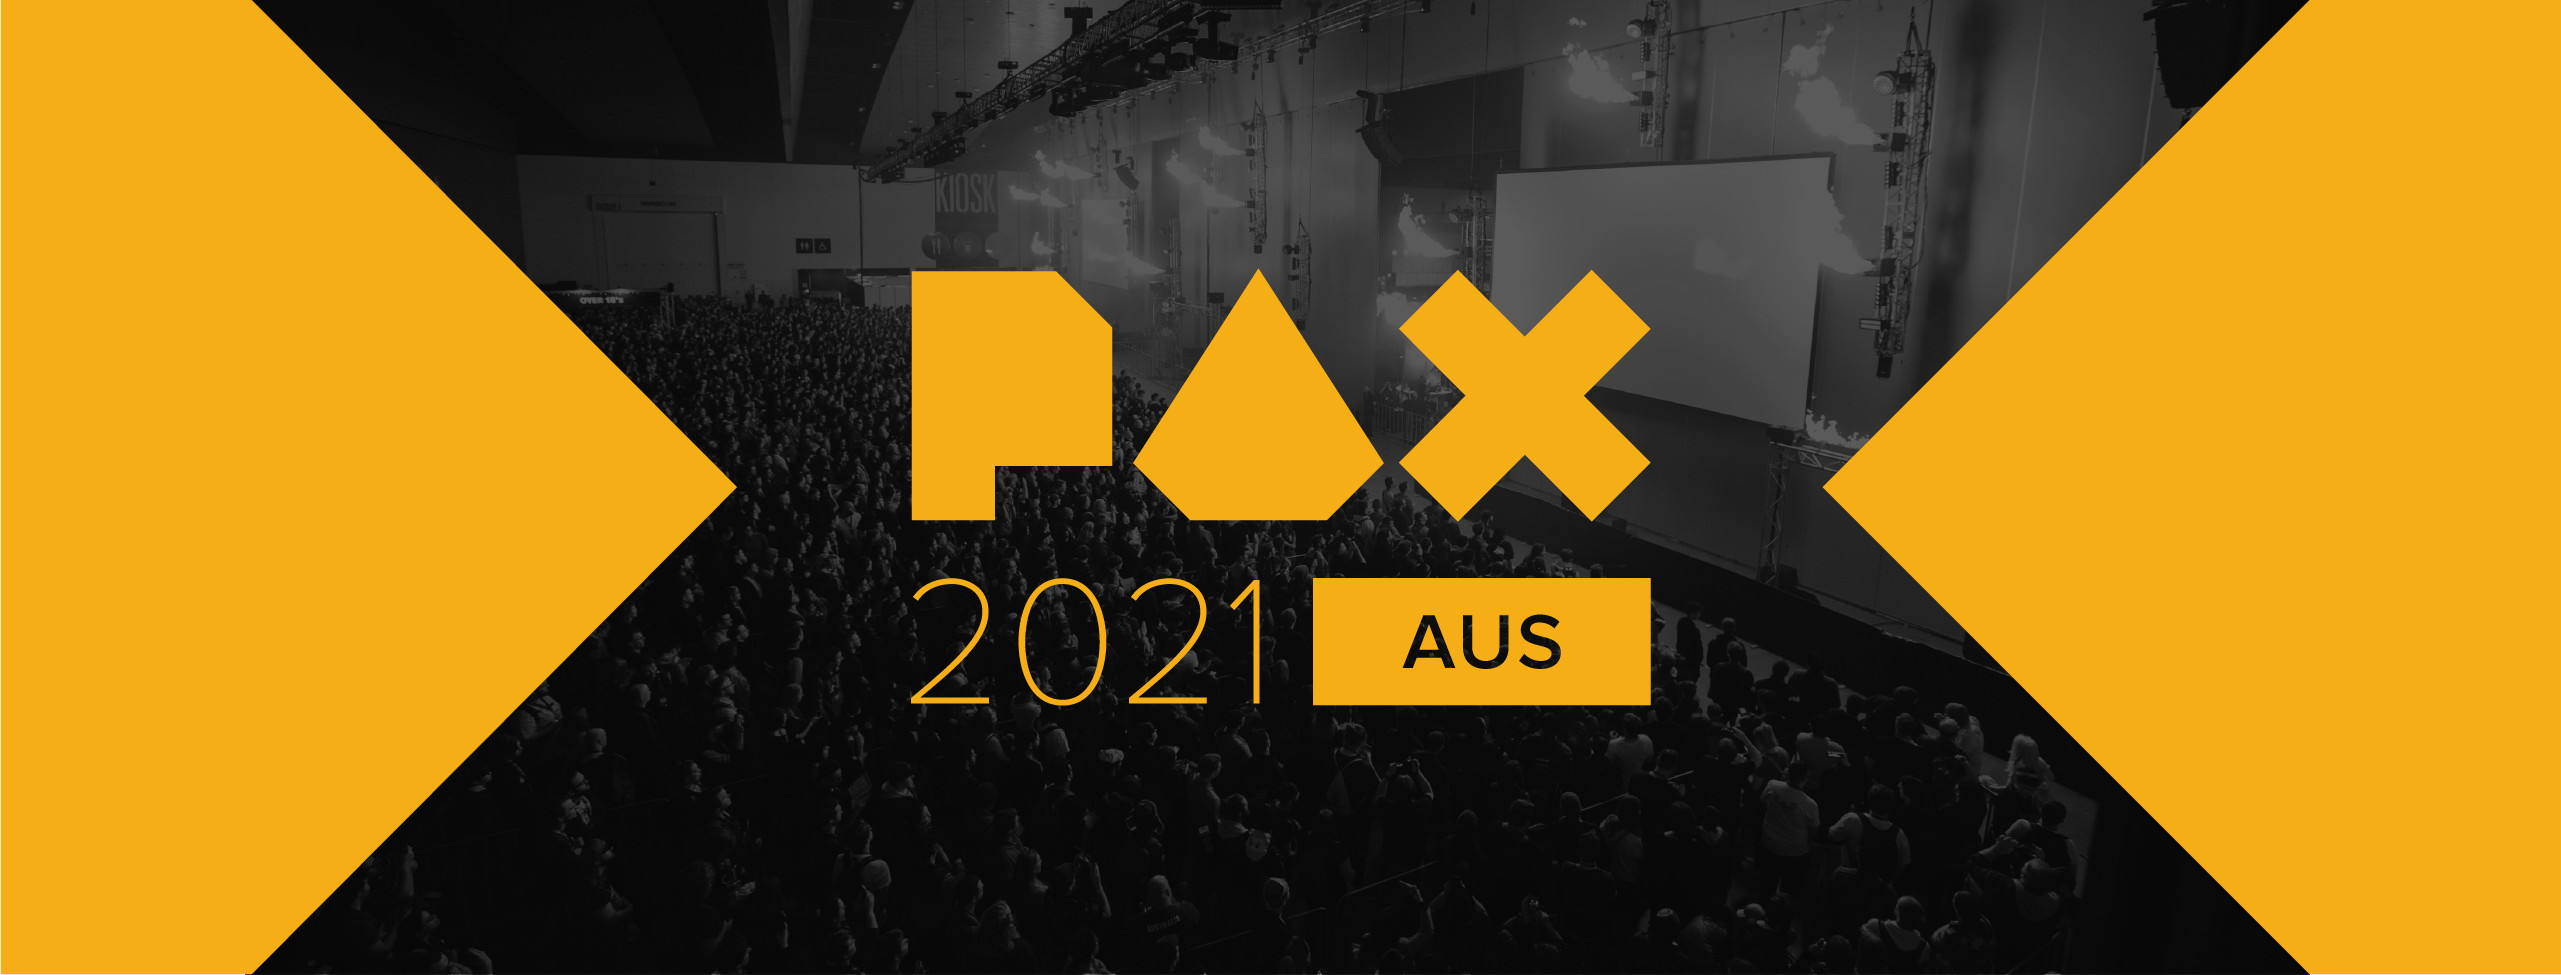 PAX Aus is back this year with dates just announced Checkpoint